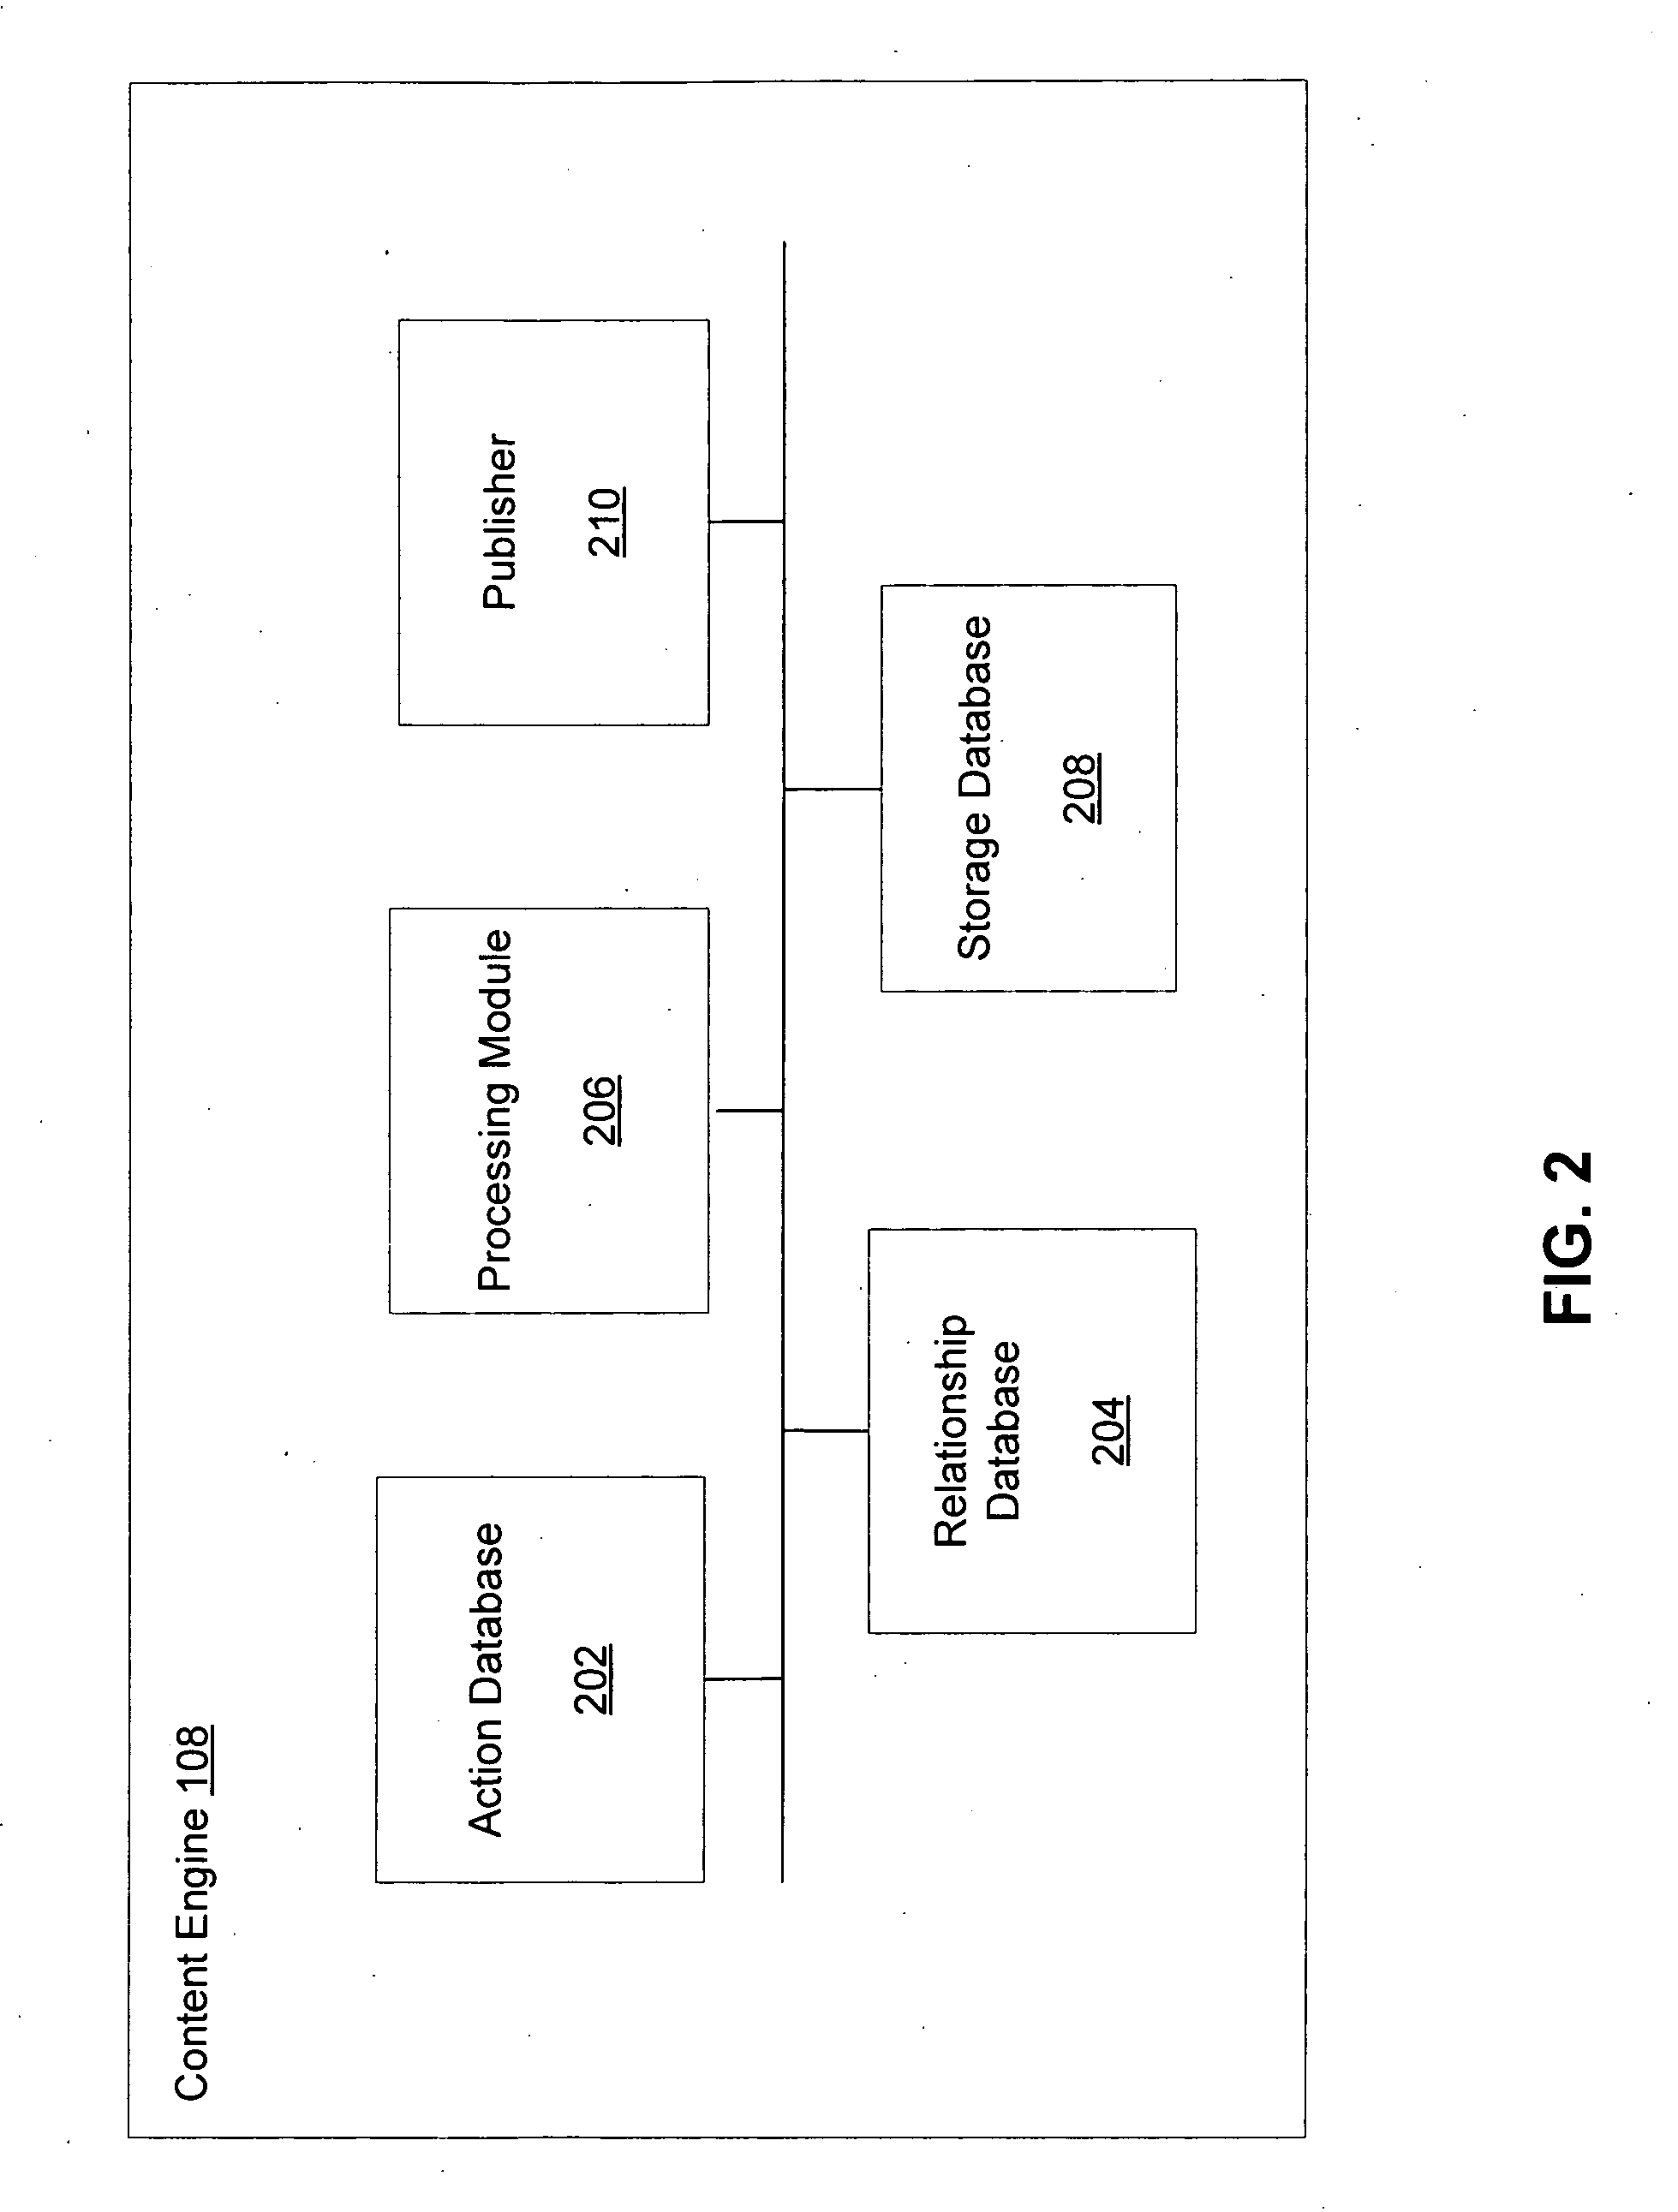 Systems and methods for generating dynamic relationship-based content personalized for members of a web-based social network